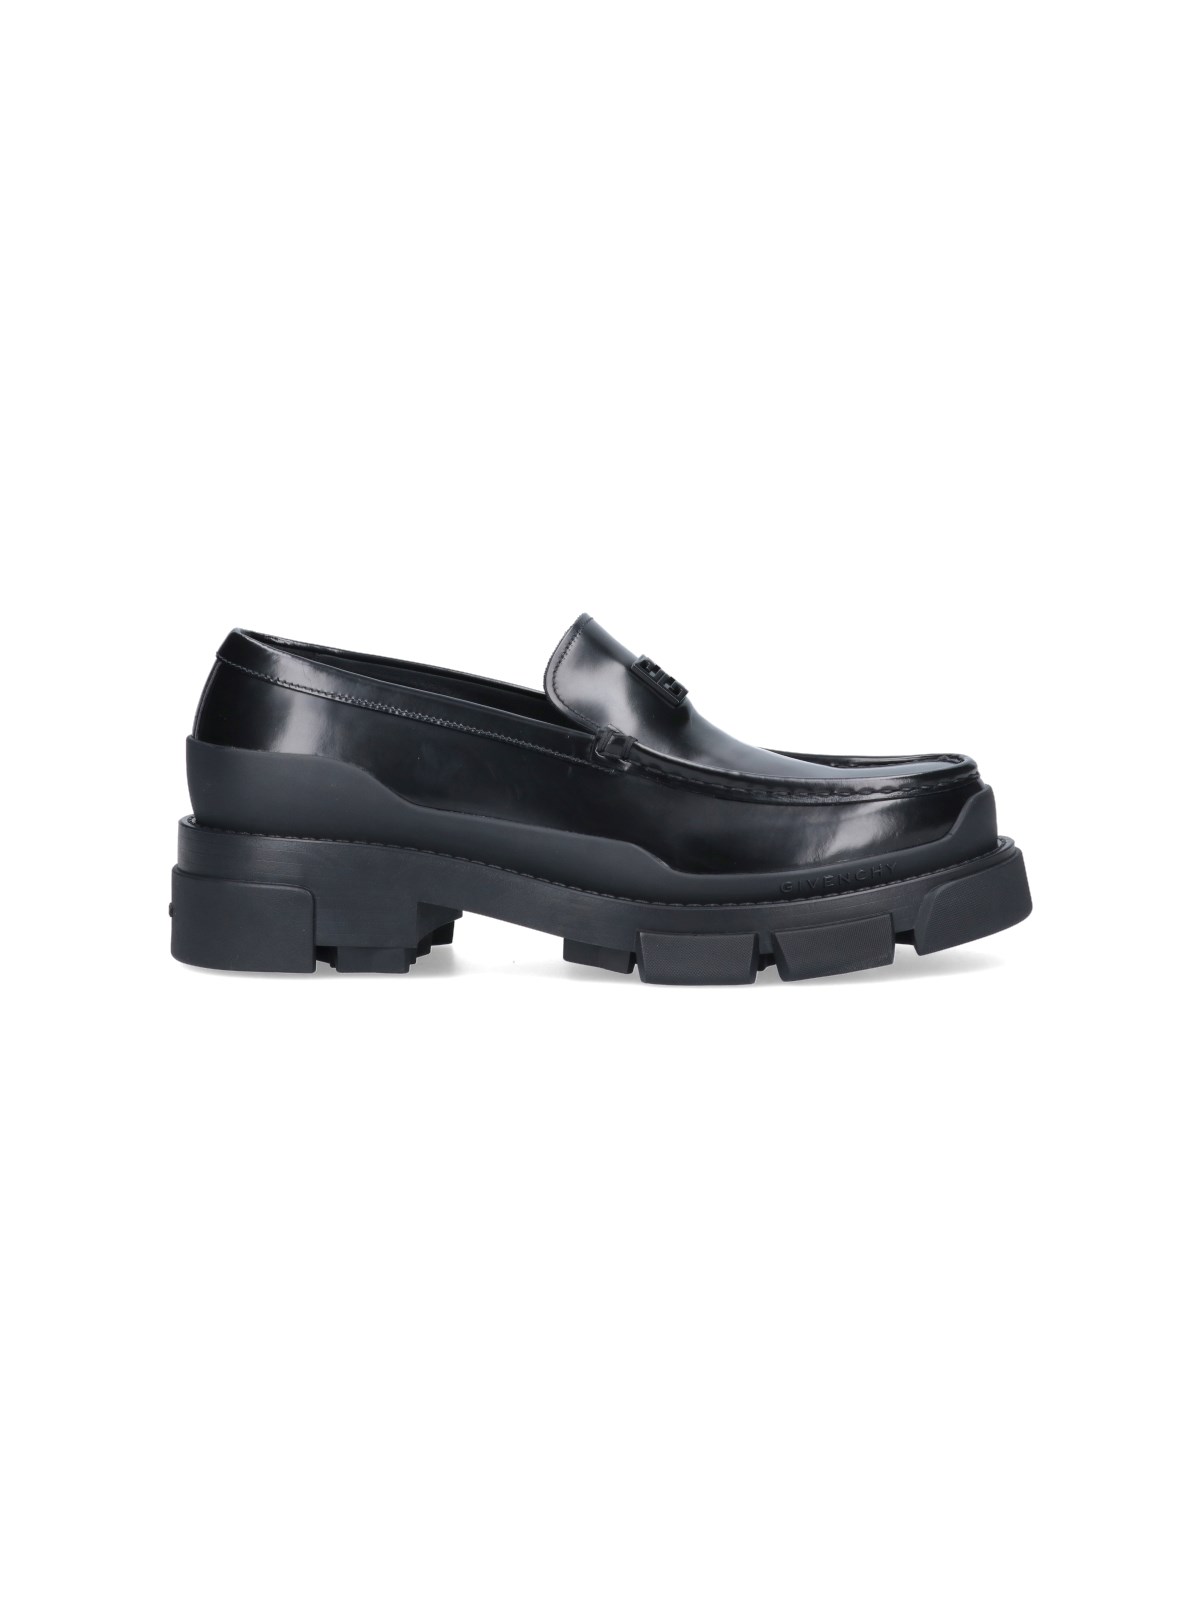 GIVENCHY 'TERRA' LOAFERS